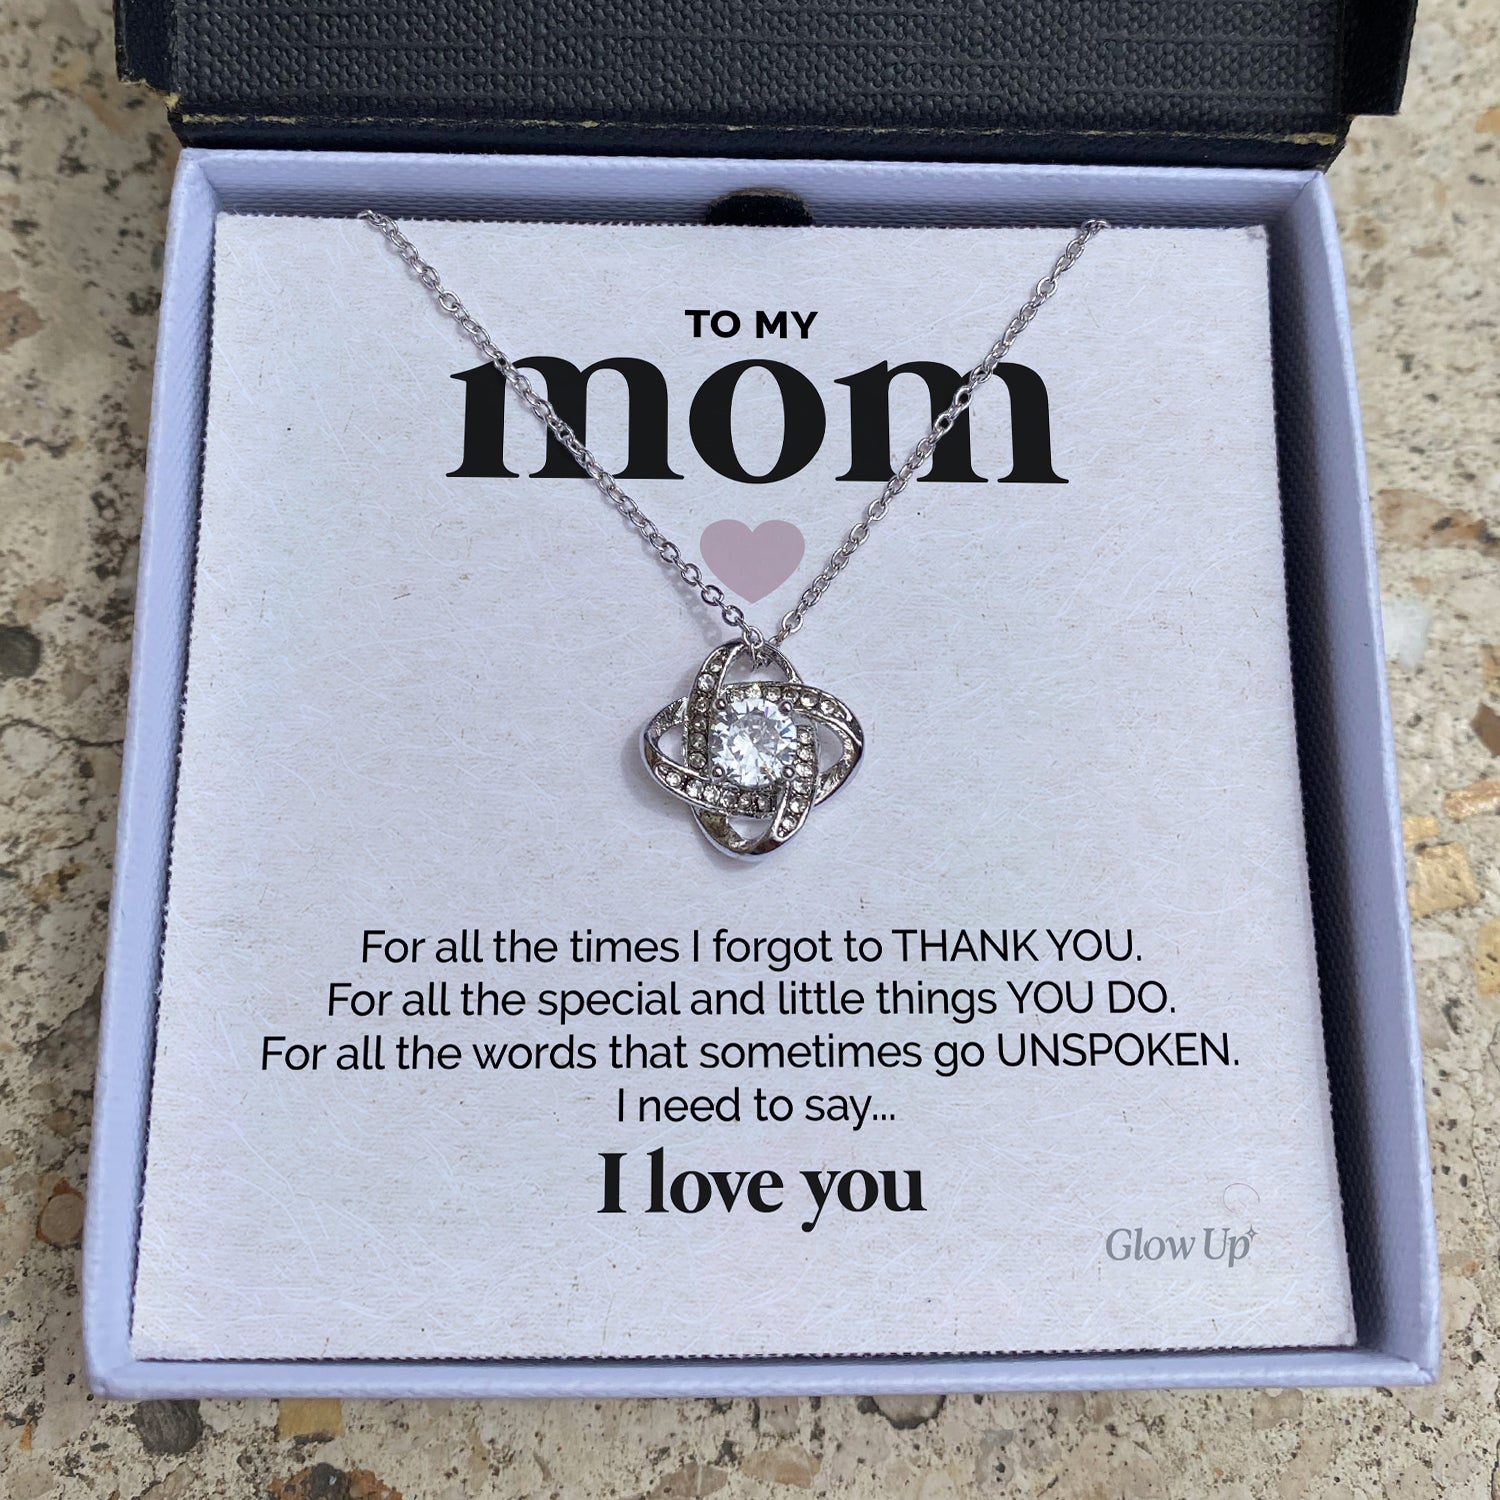 ShineOn Fulfillment Jewelry Two Toned Box To My Mom - Thank You - Loveknot Necklace